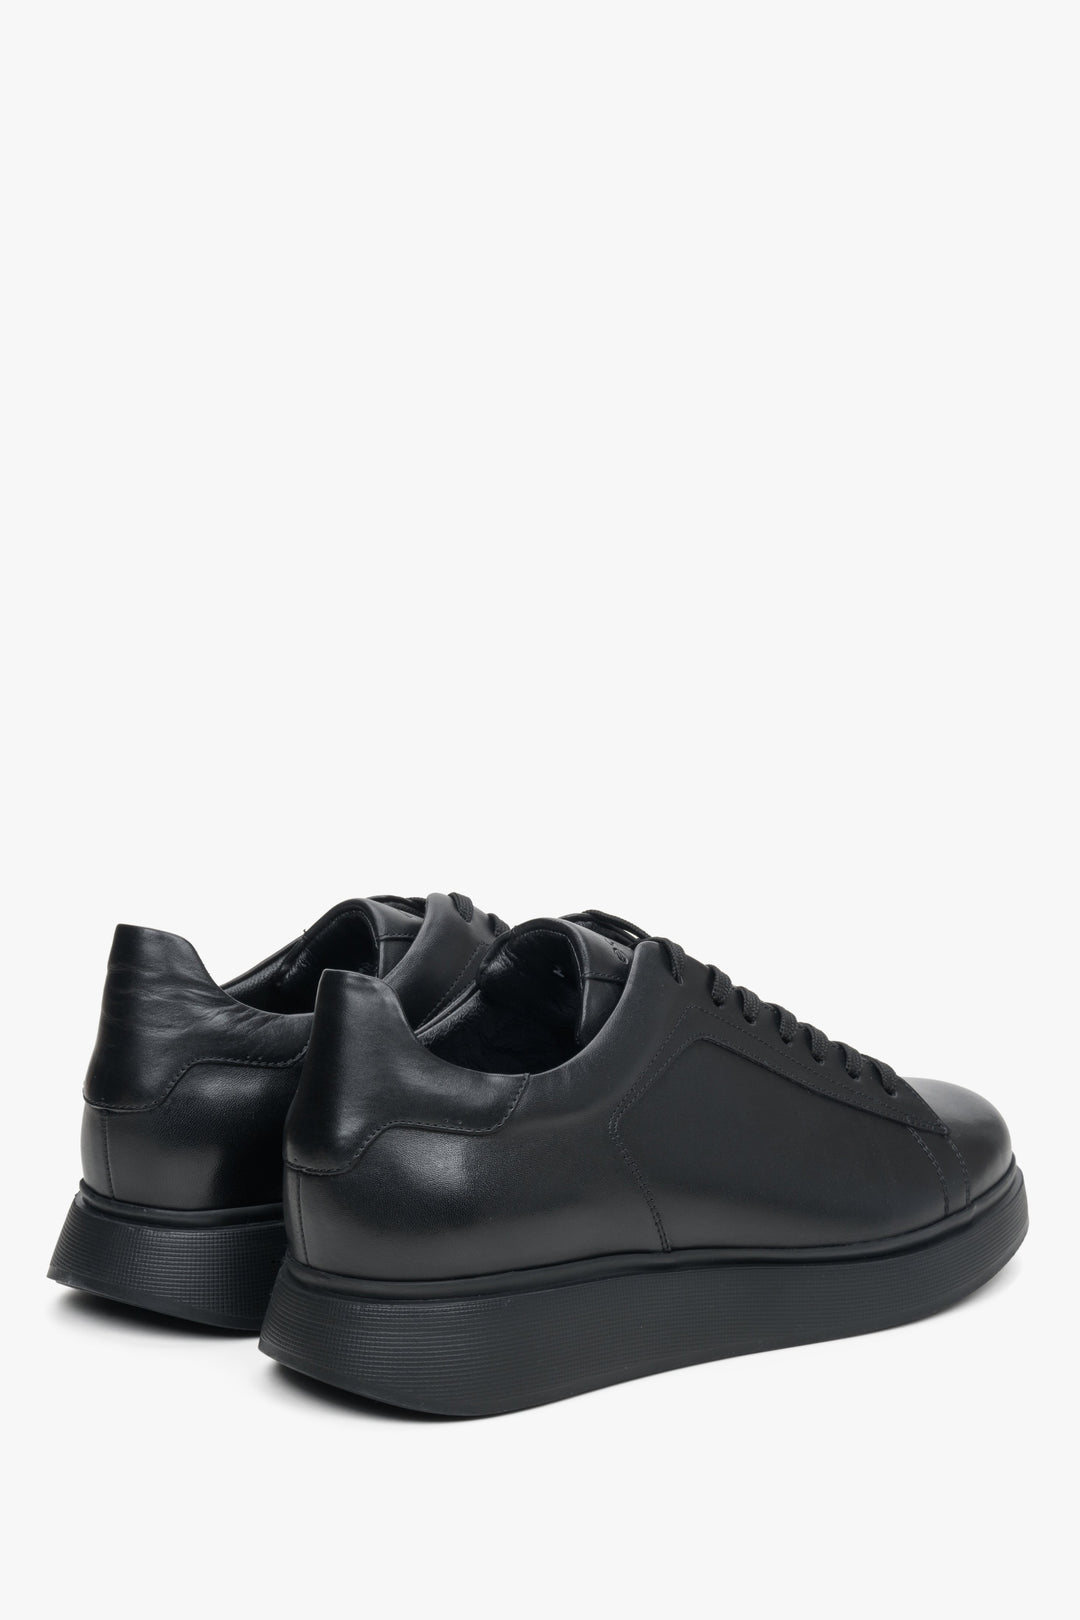 Men's low black leather sneakers by Estro - close-up on the side line and heel of the shoes.